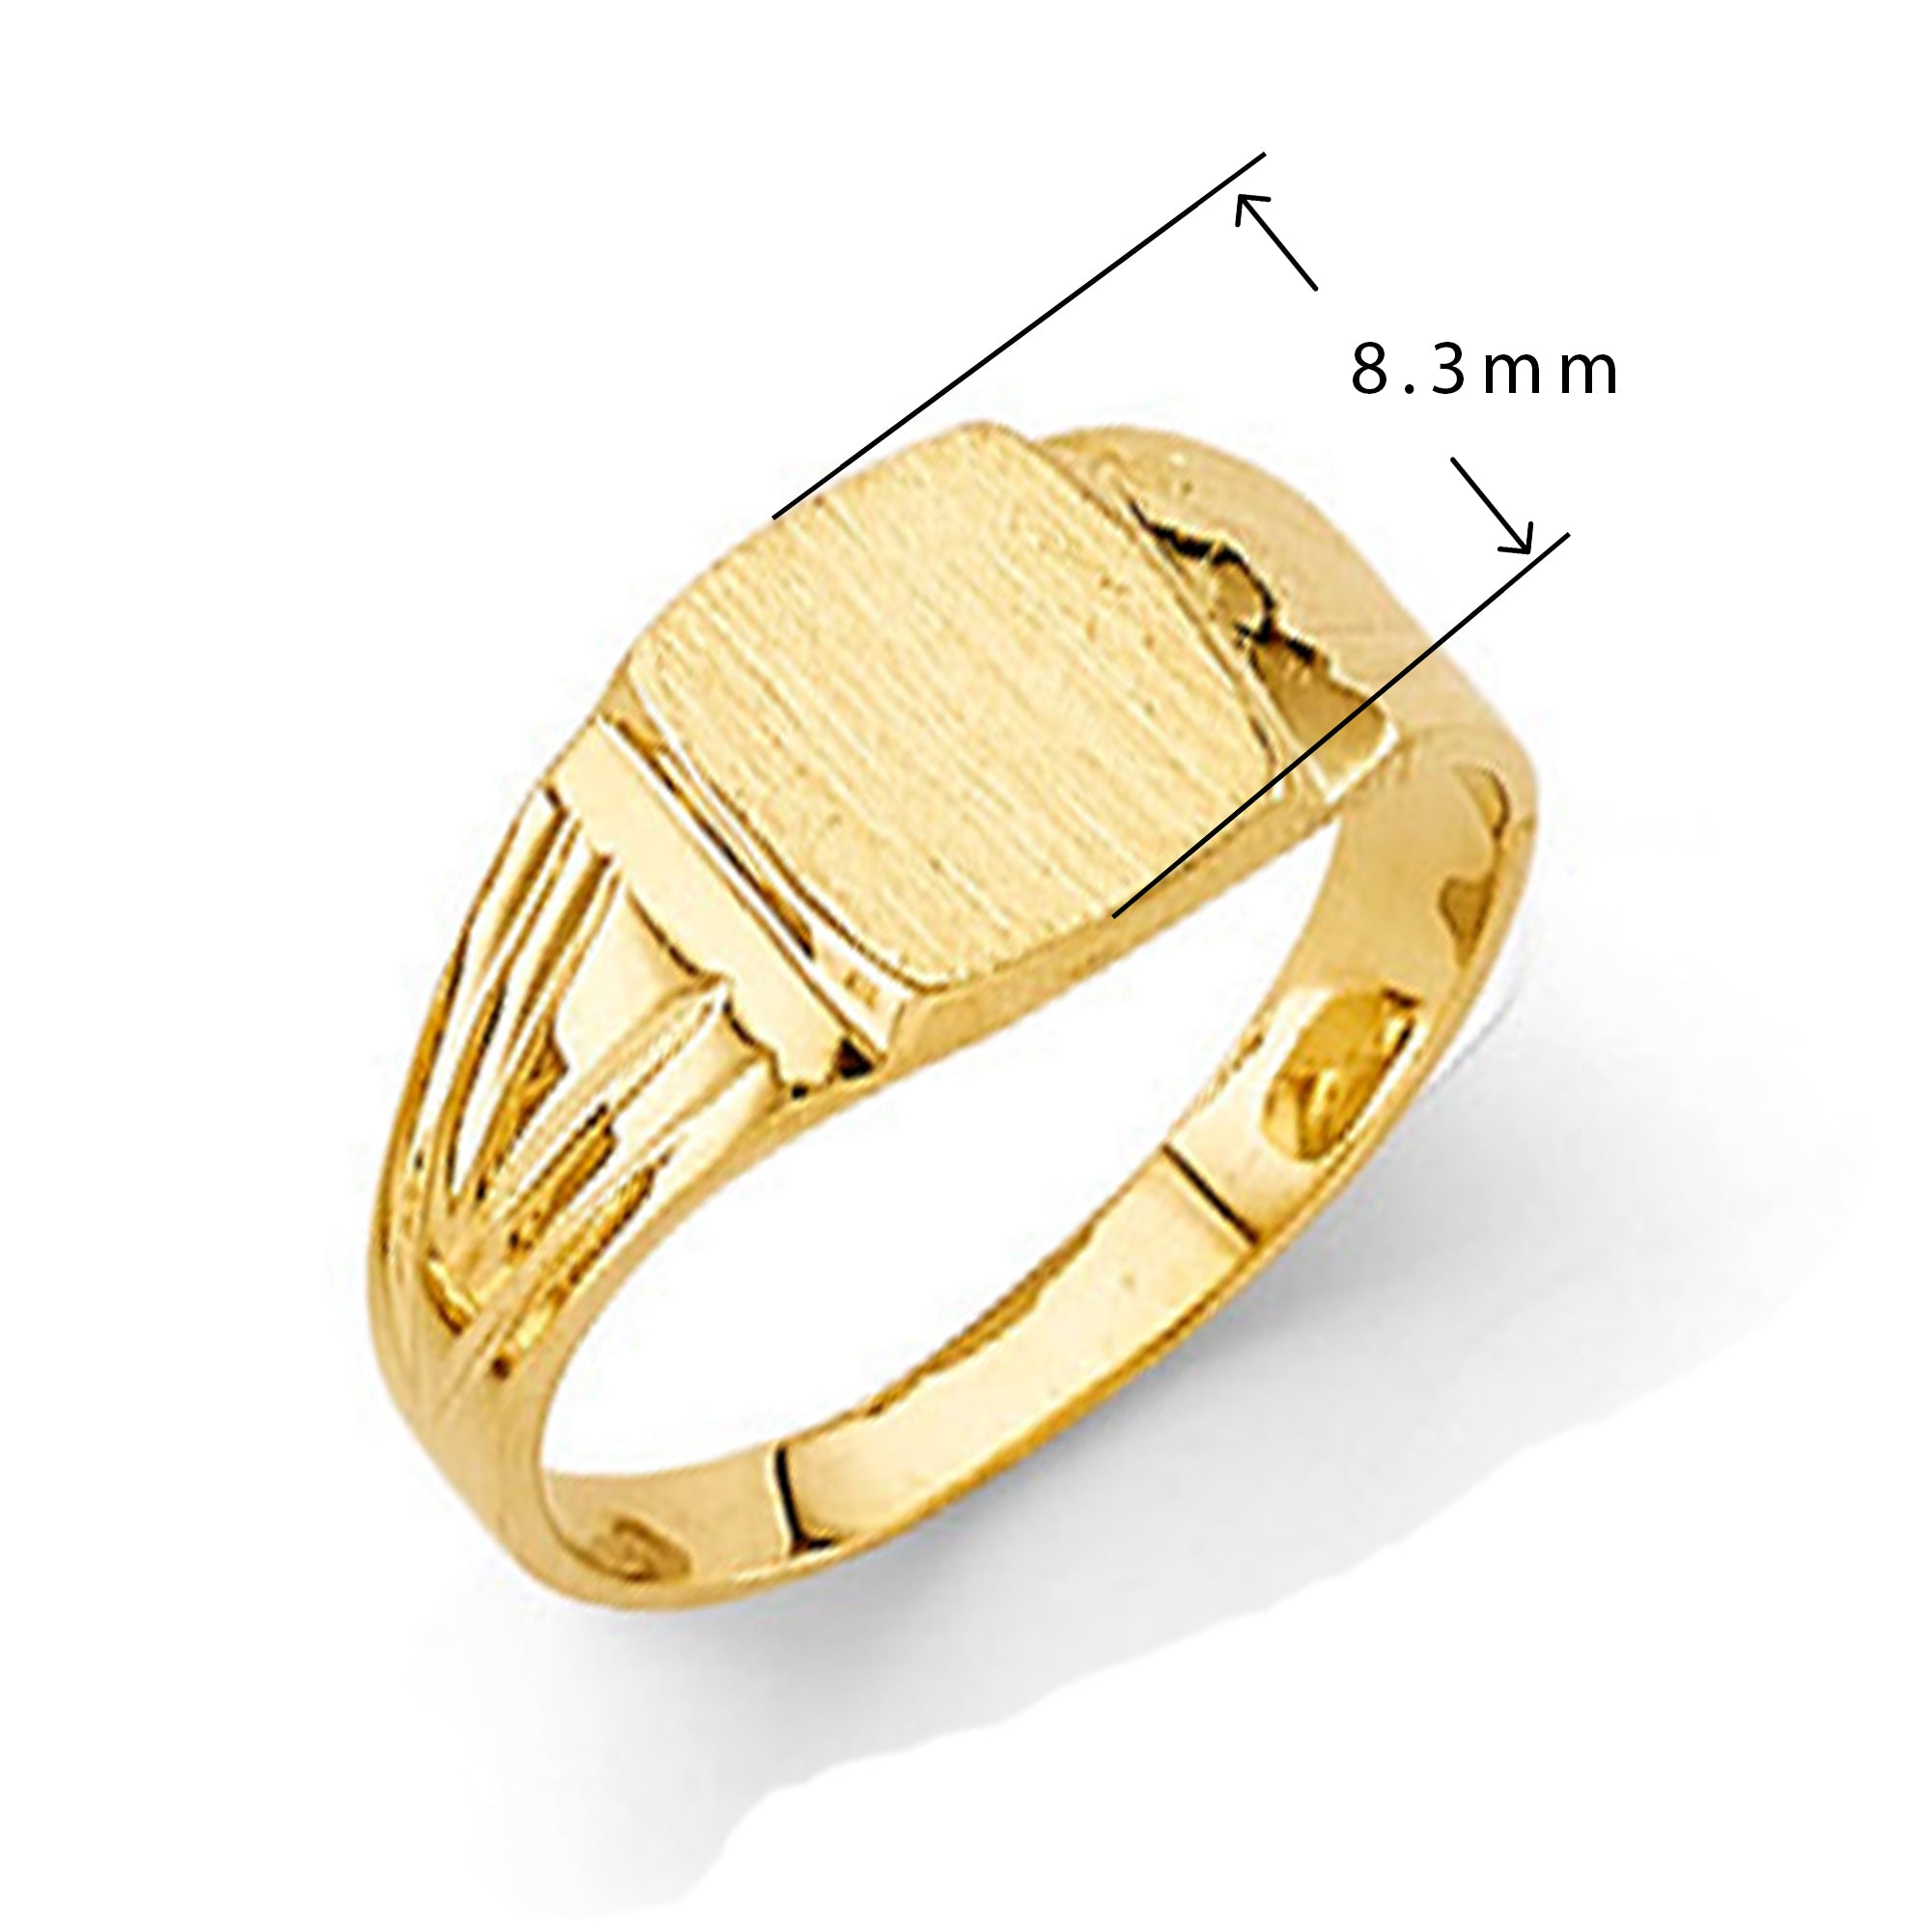 Engravable Signet Ring in Solid Gold with Measurement